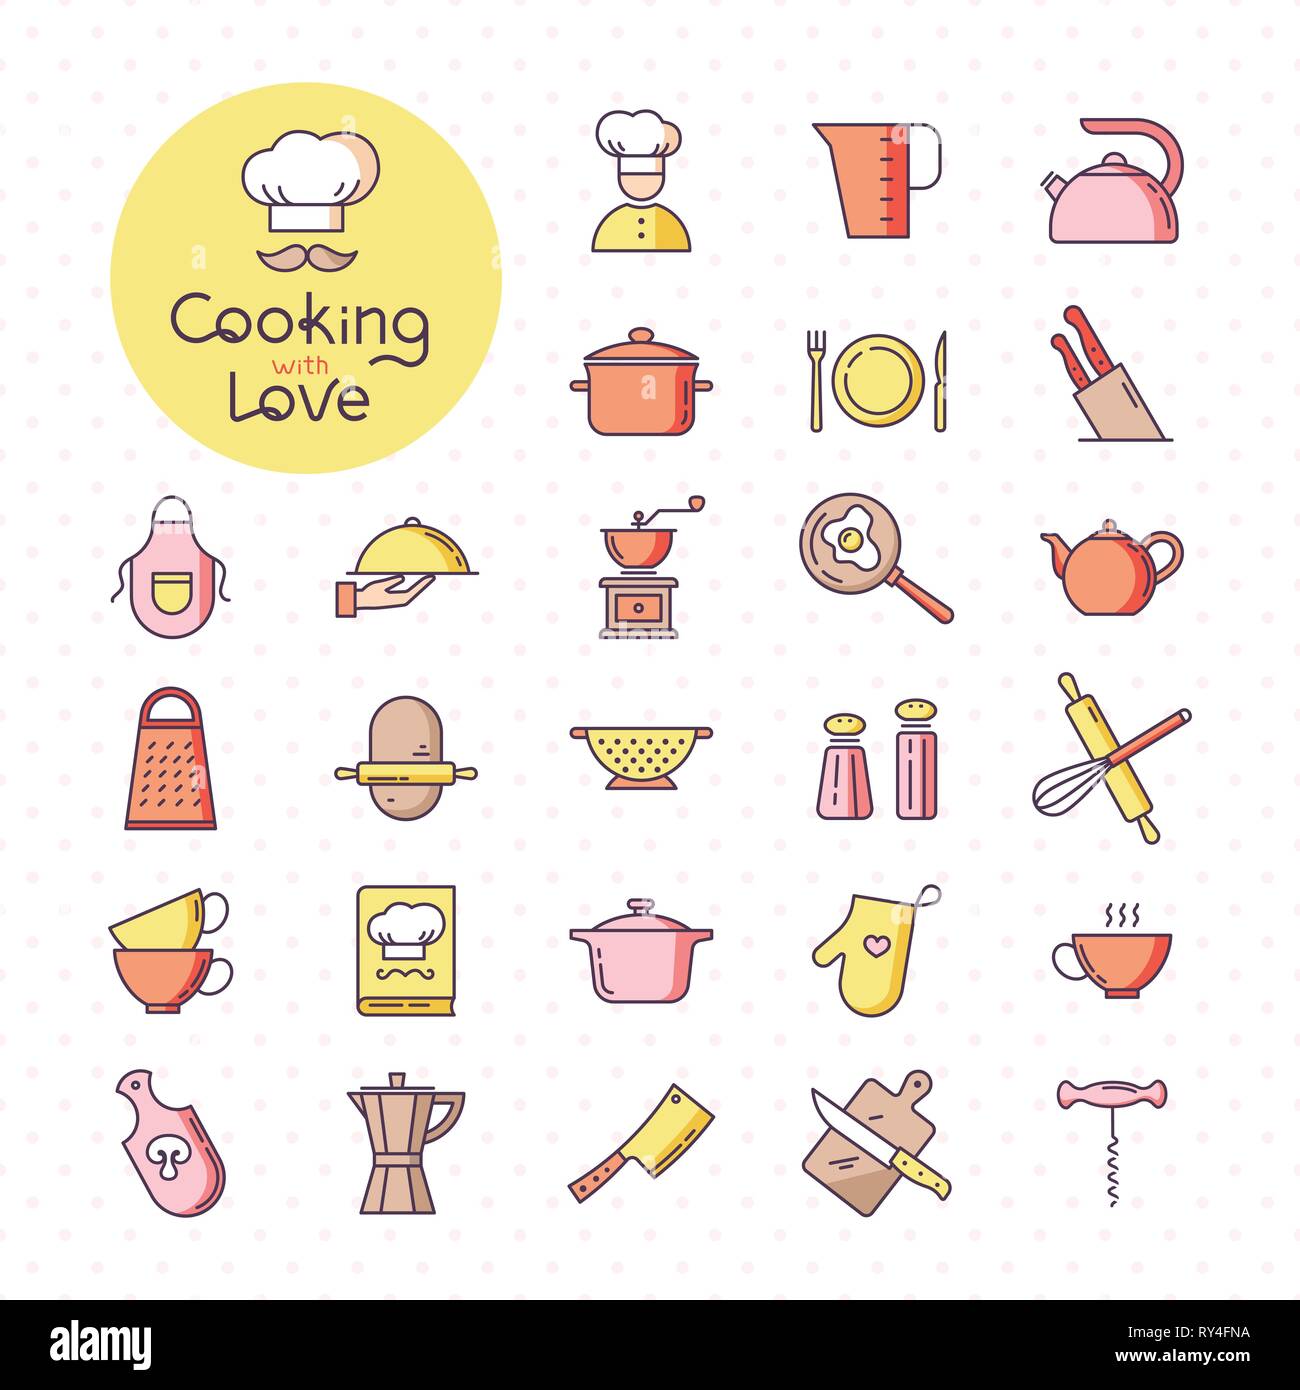 Set of pixel-perfect colorful kitchen icons, isolated on the white background. Stock Vector